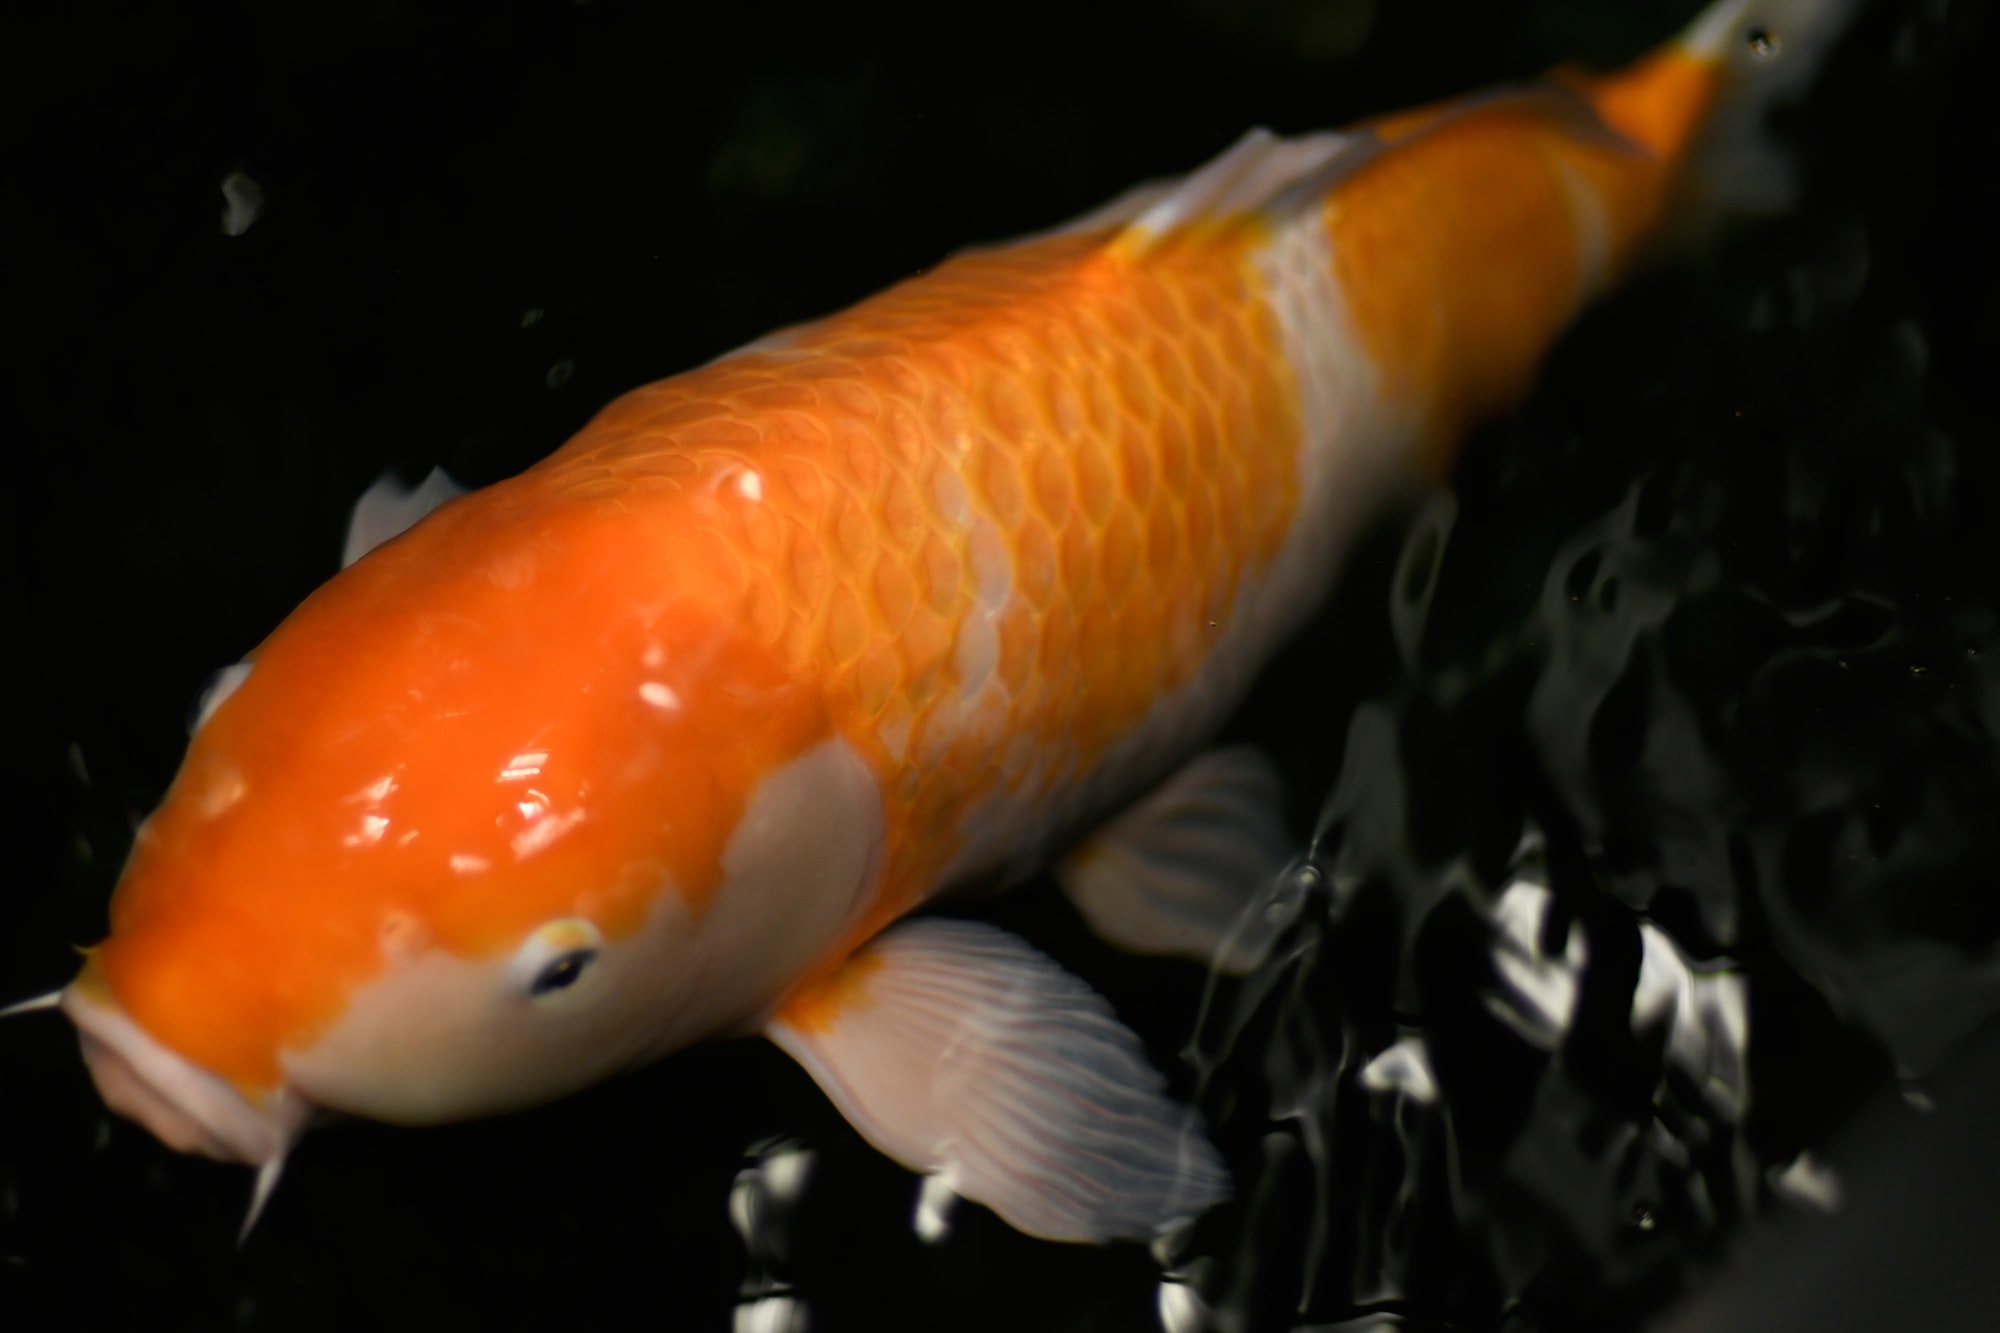 koi fish in a pond, black background